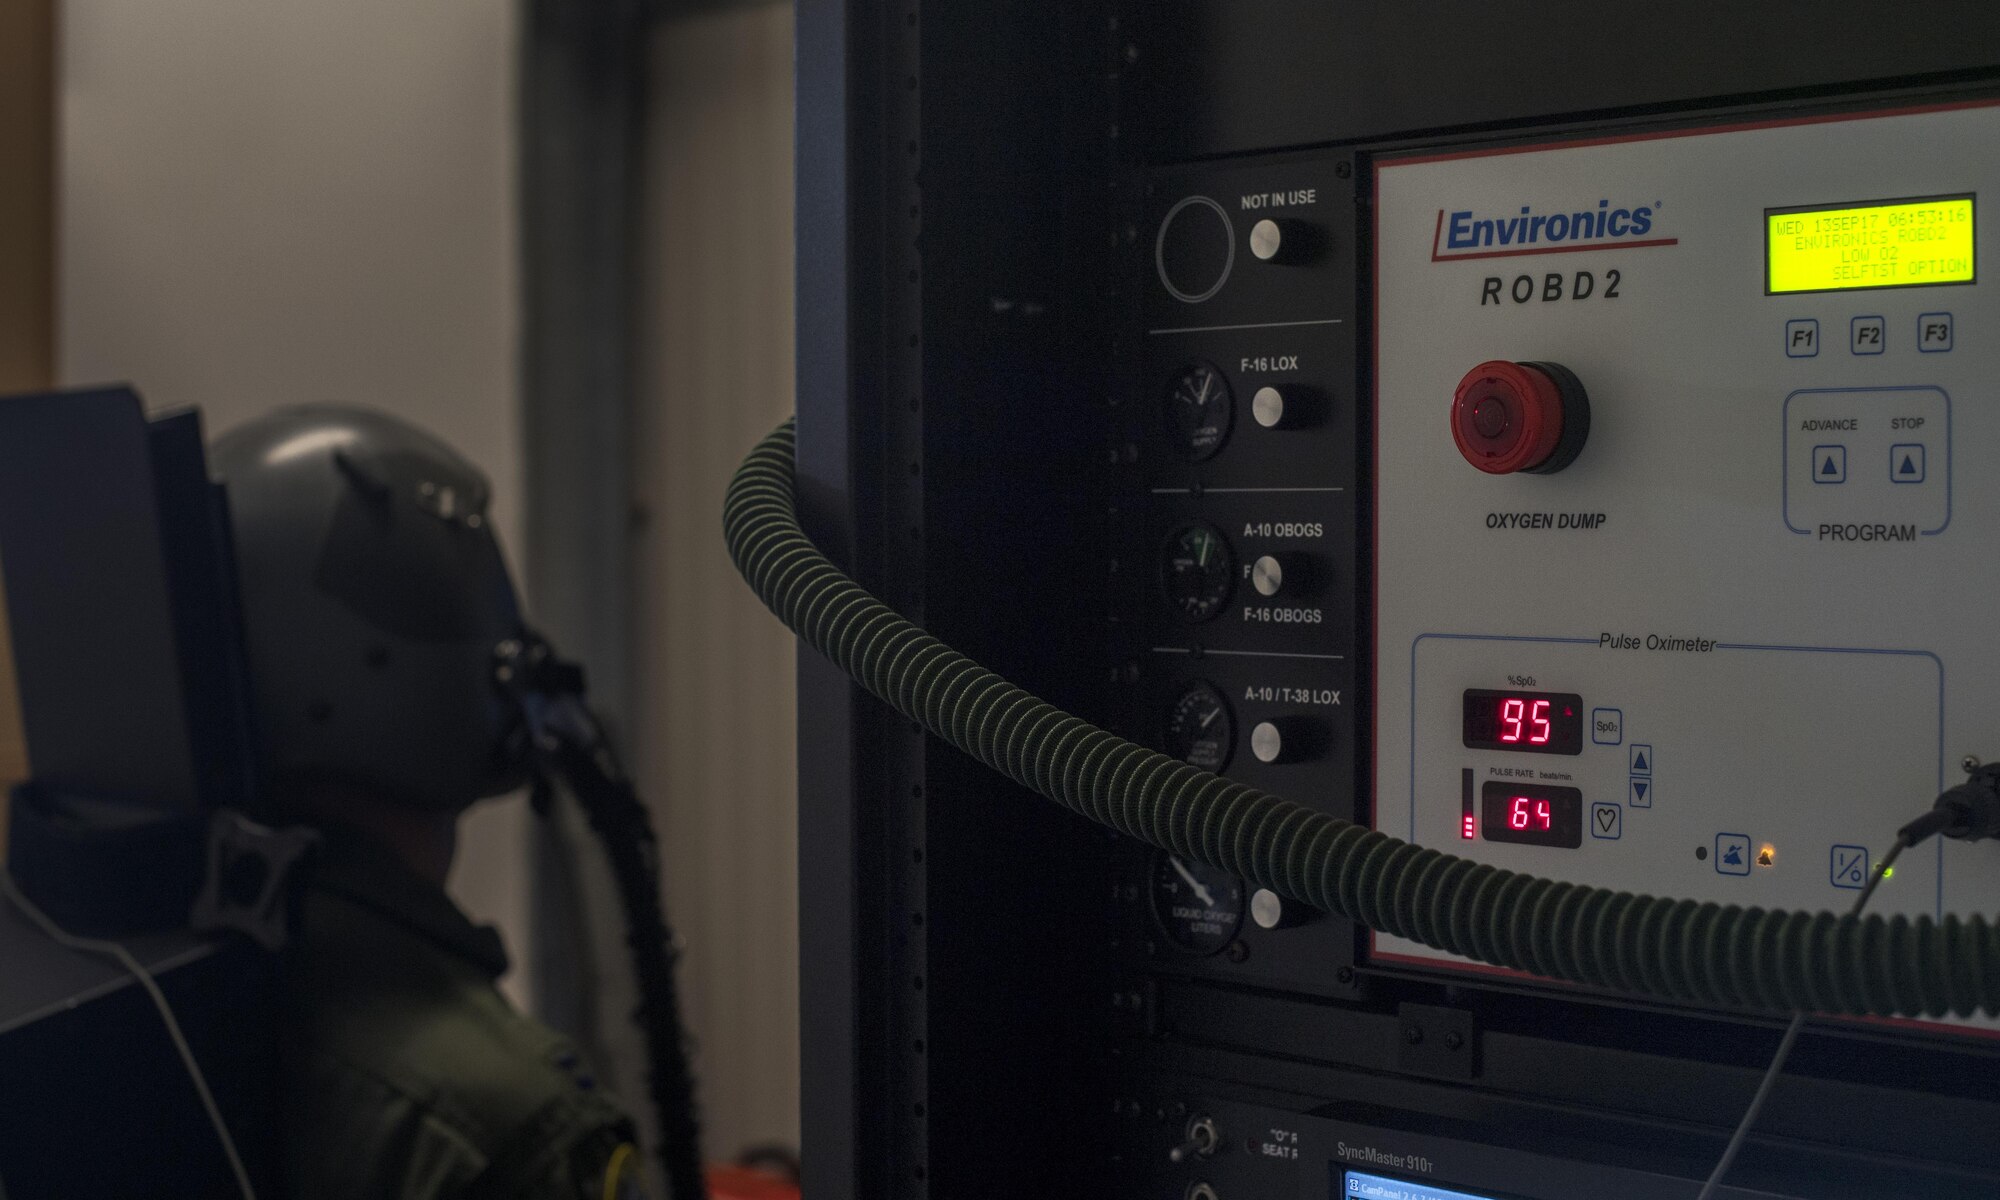 Numbers light up on the 86th Aerospace Medicine Squadron Aerospace Physiology’s reduced oxygen breathing device while it is hooked up to an 86th Operations Support Squadron plot on Ramstein Air Base, Germany, Sept. 13, 2017. Air crew personnel operate a simulation tailored to their specific job when attached to an ROBD while experiencing the effects of hypoxia, the lack of oxygen at high altitudes, so they can prepare themselves if they experience symptoms while actually flying. (U.S. Air Force photo by Senior Airman Tryphena Mayhugh)